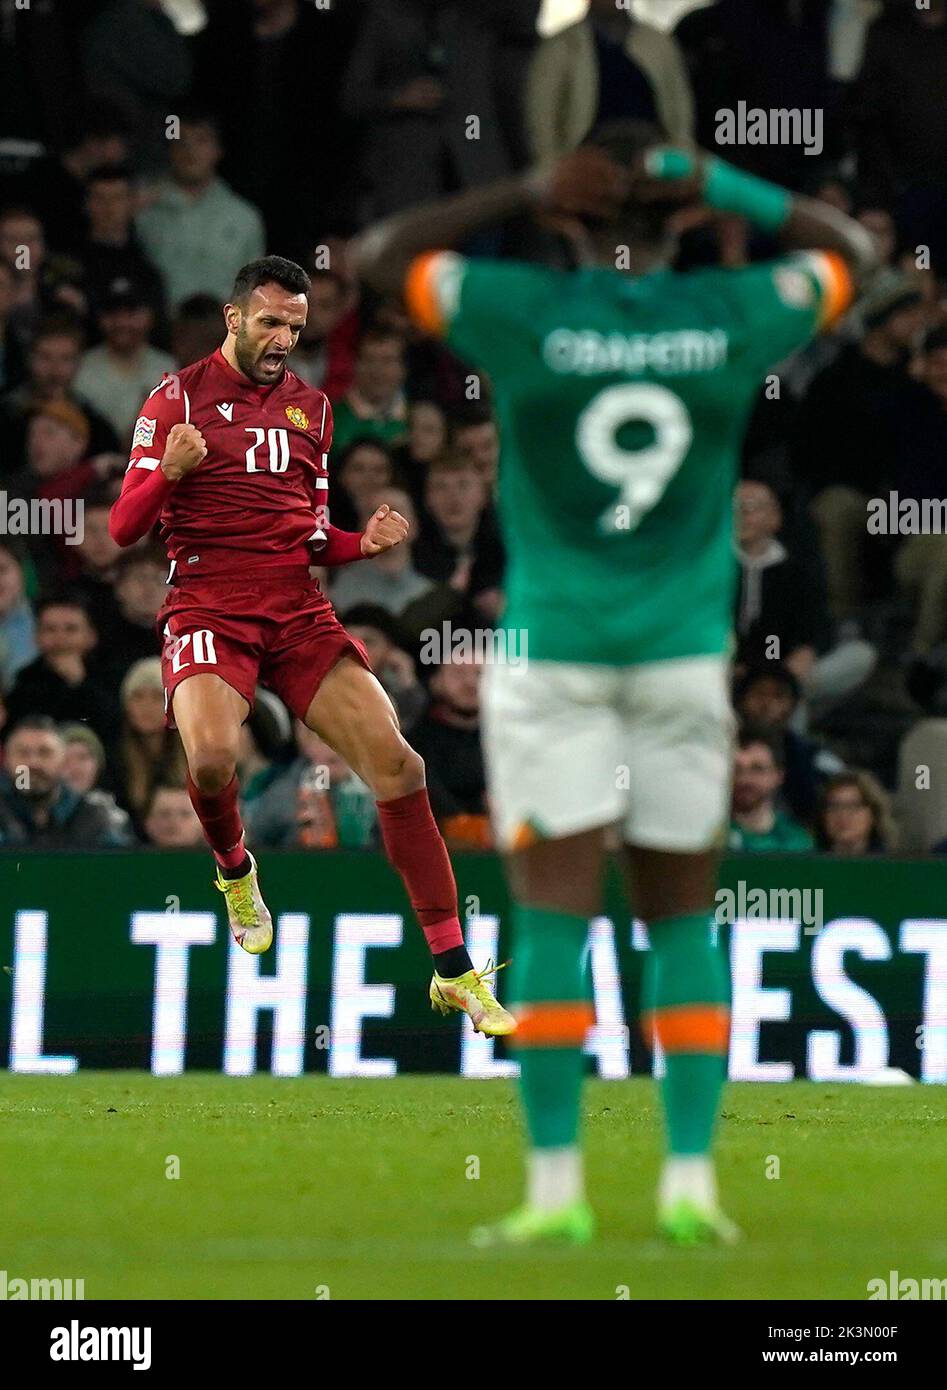 Armenia's Artak Dashyan (left) scores their side's first goal of the game as Republic of Ireland's Michael Obafemi appears dejected during the UEFA Nations League match at the Aviva Stadium in Dublin, Ireland. Picture date: Tuesday September 27, 2022. Stock Photo